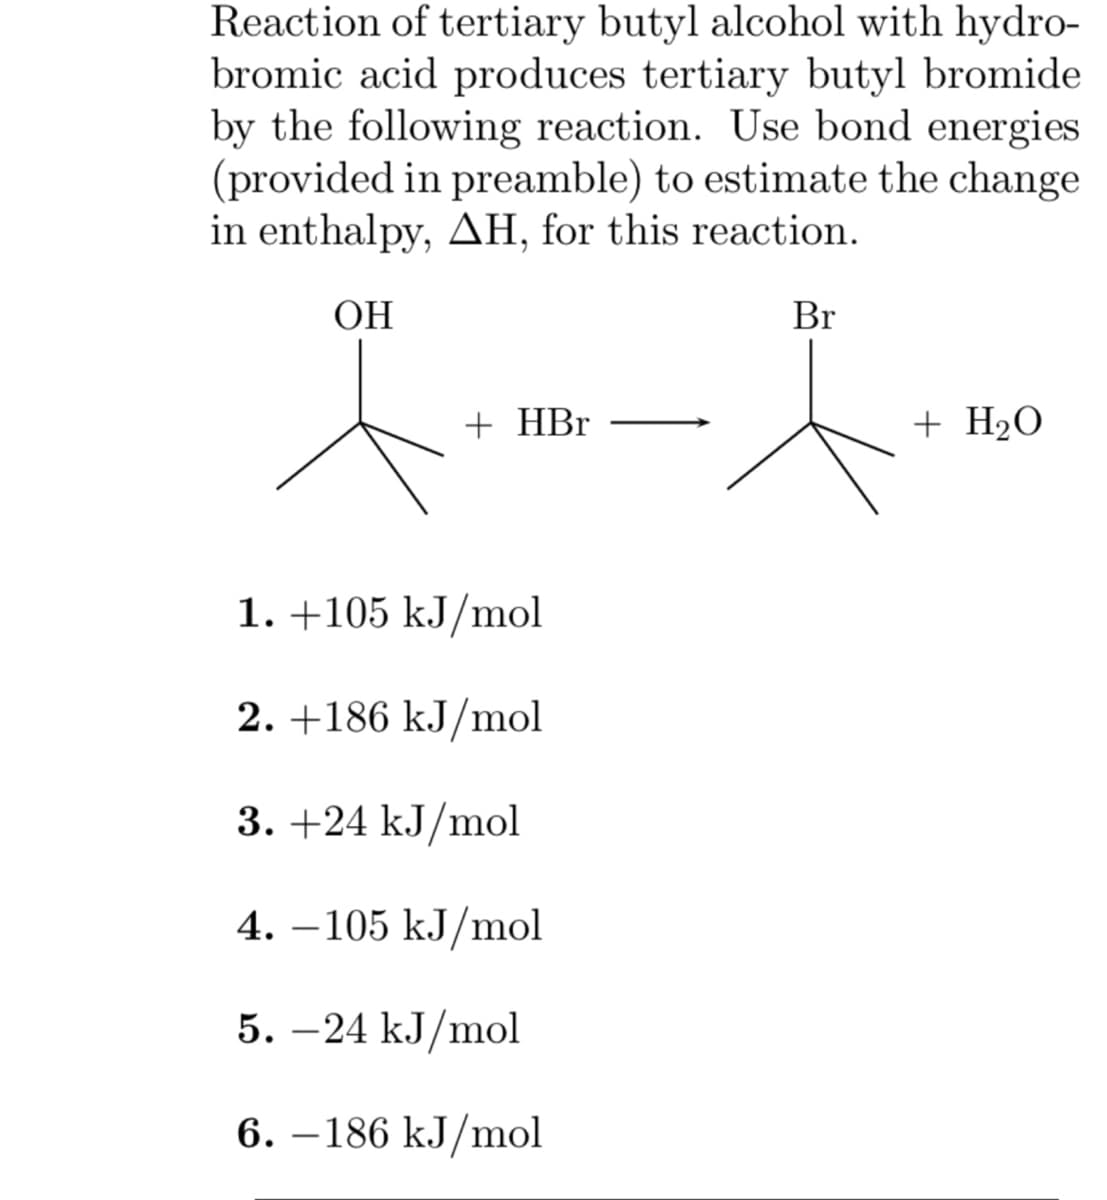 Reaction of tertiary butyl alcohol with hydro-
bromic acid produces tertiary butyl bromide
by the following reaction. Use bond energies
(provided in preamble) to estimate the change
in enthalpy, AH, for this reaction.
OH
+ HBr
1. +105 kJ/mol
2. +186 kJ/mol
3. +24 kJ/mol
4.-105 kJ/mol
5. -24 kJ/mol
6.-186 kJ/mol
Br
+ H₂O